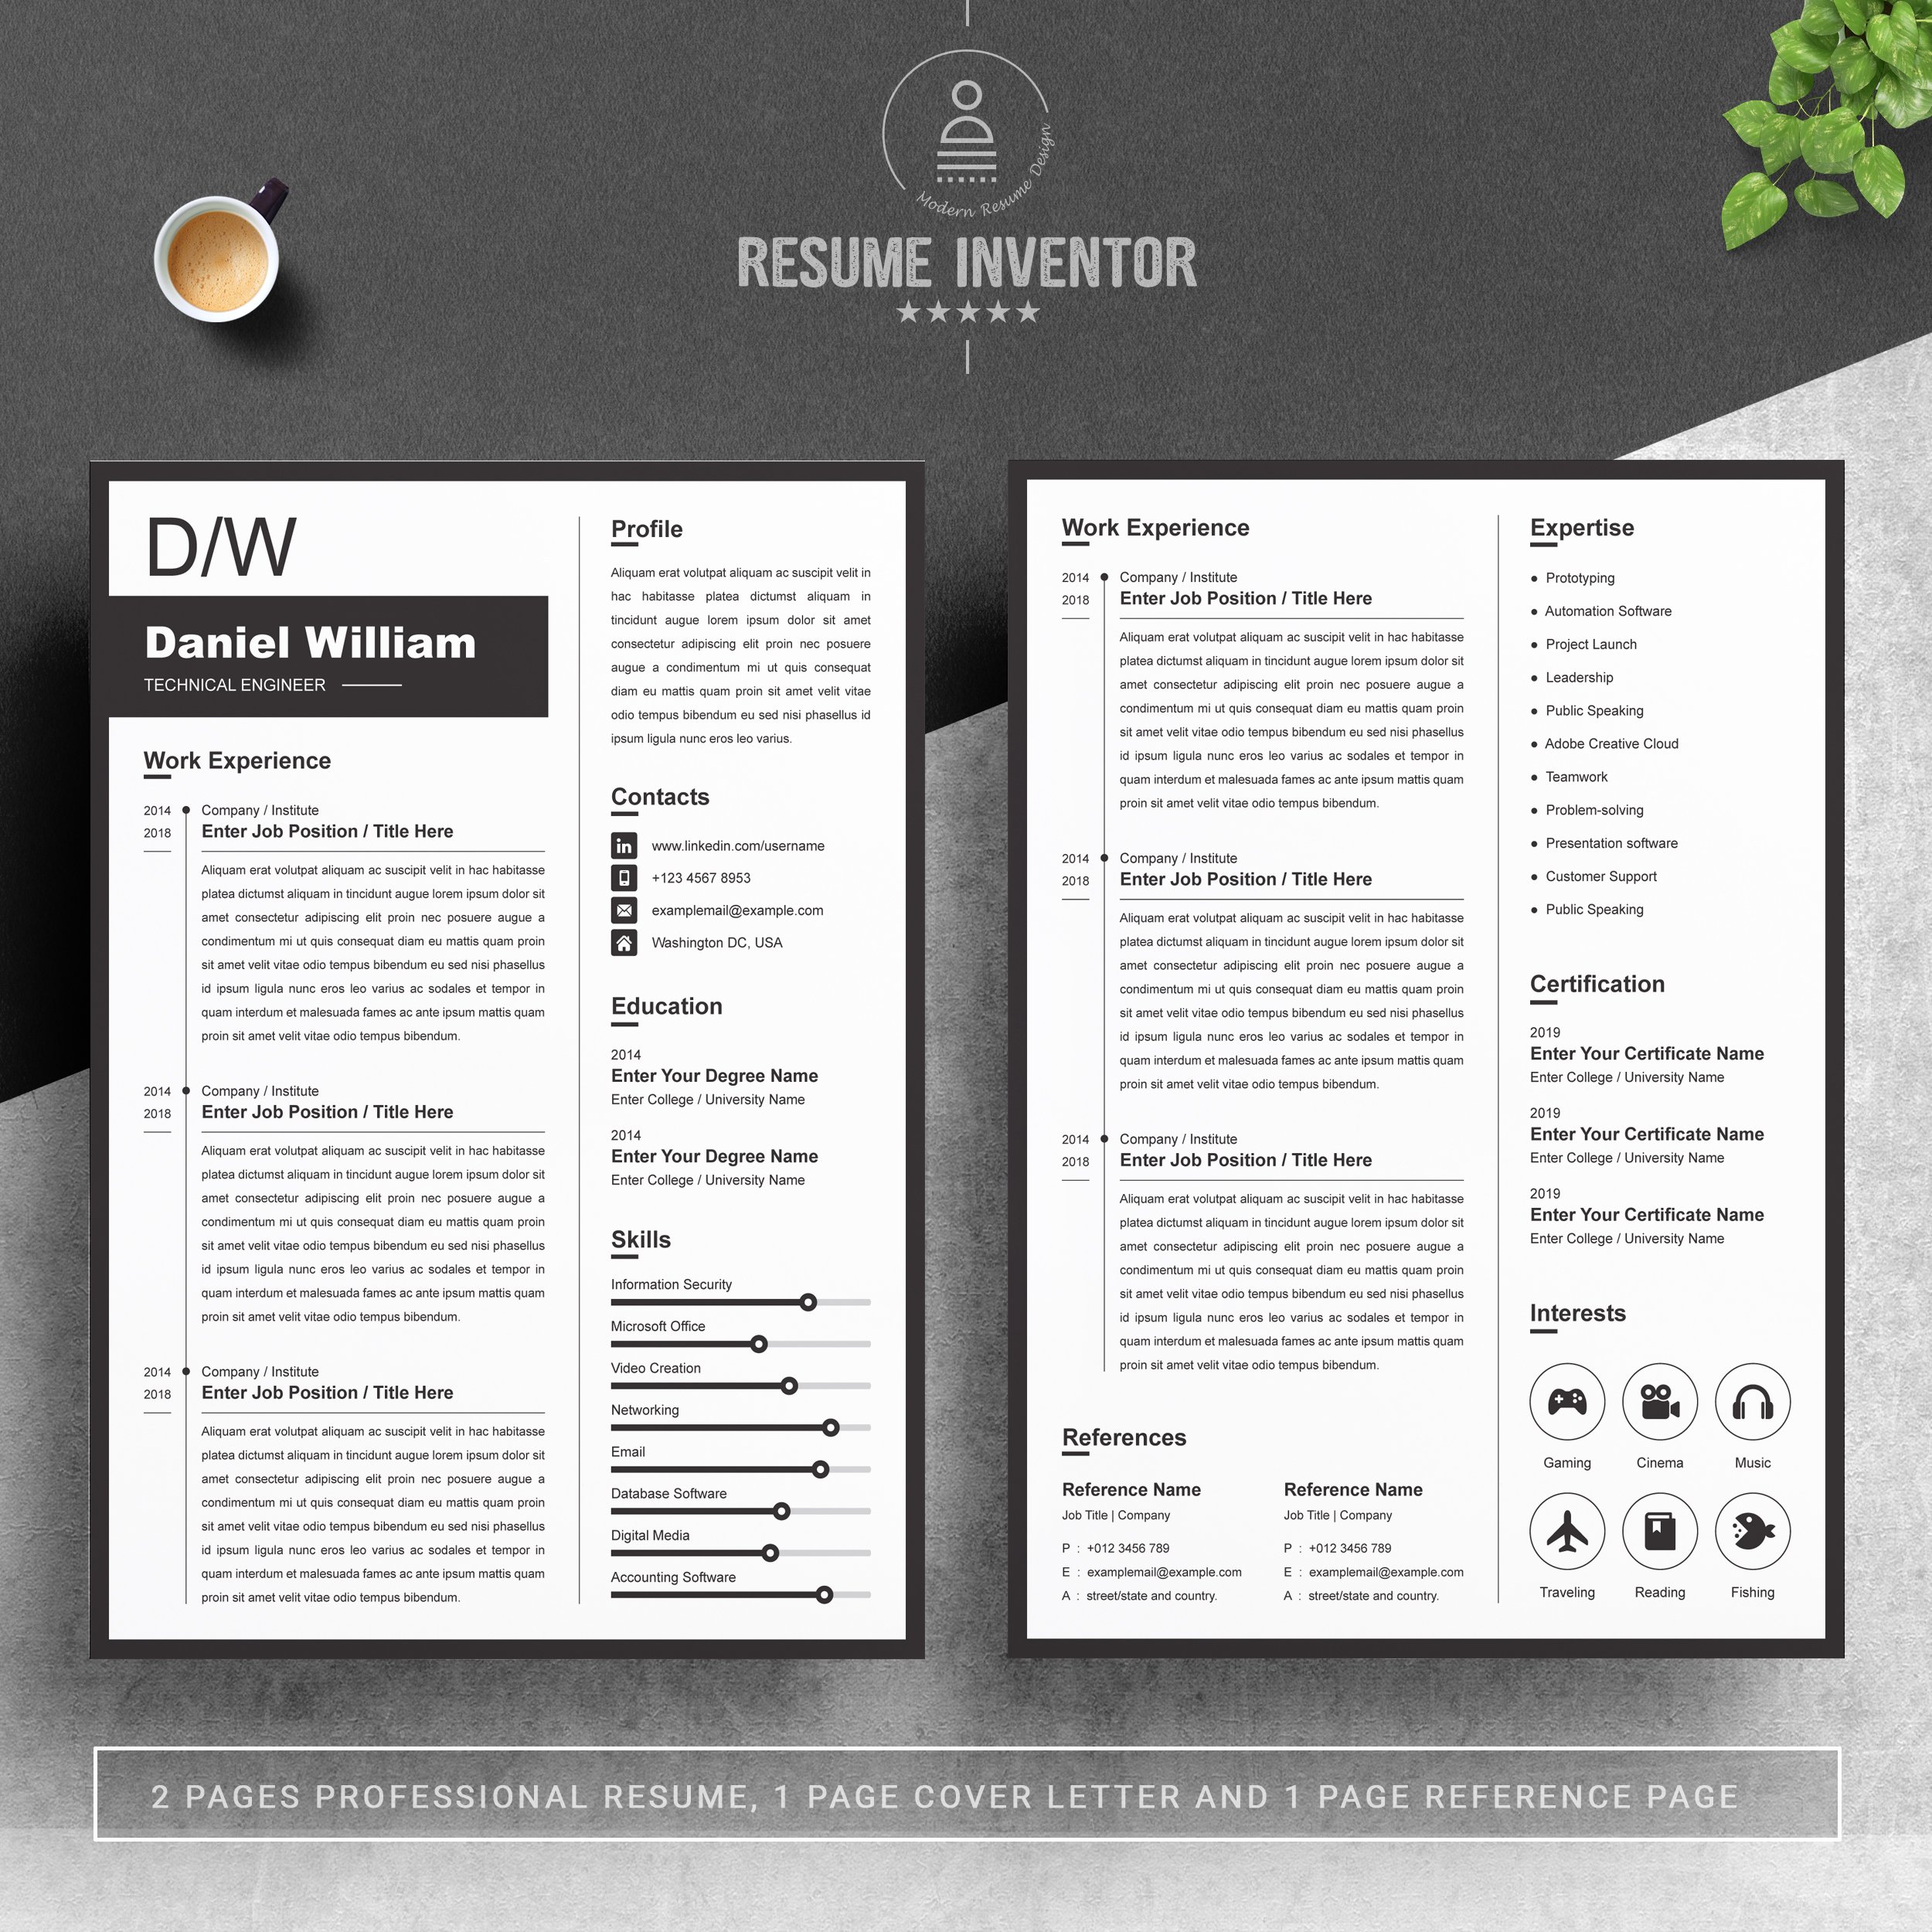 Engineer Resume Template for Word preview image.